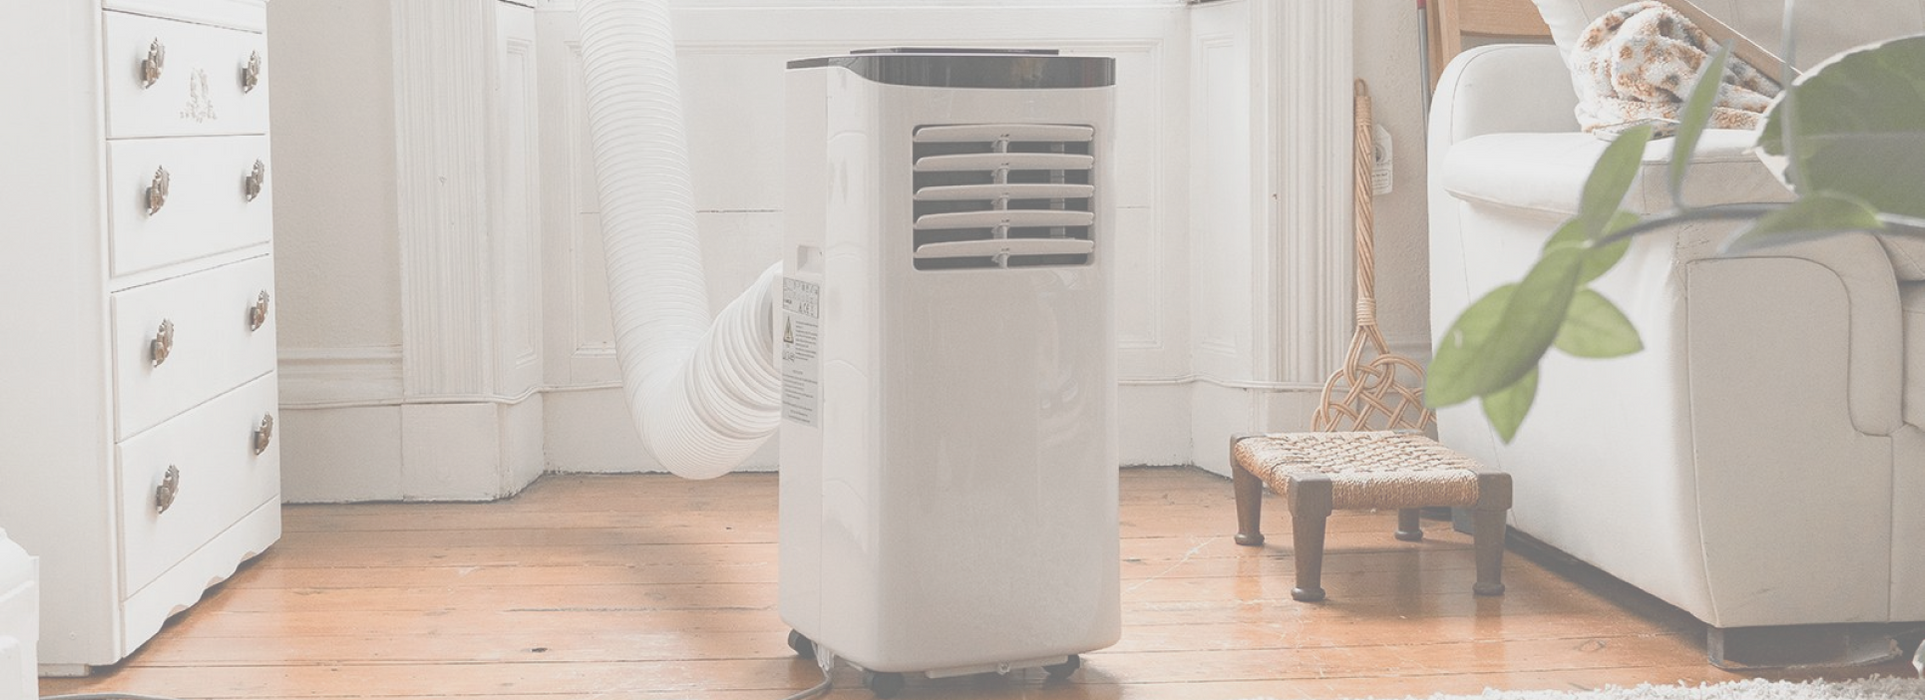 Best Buy Portable Air Conditioner For 2023